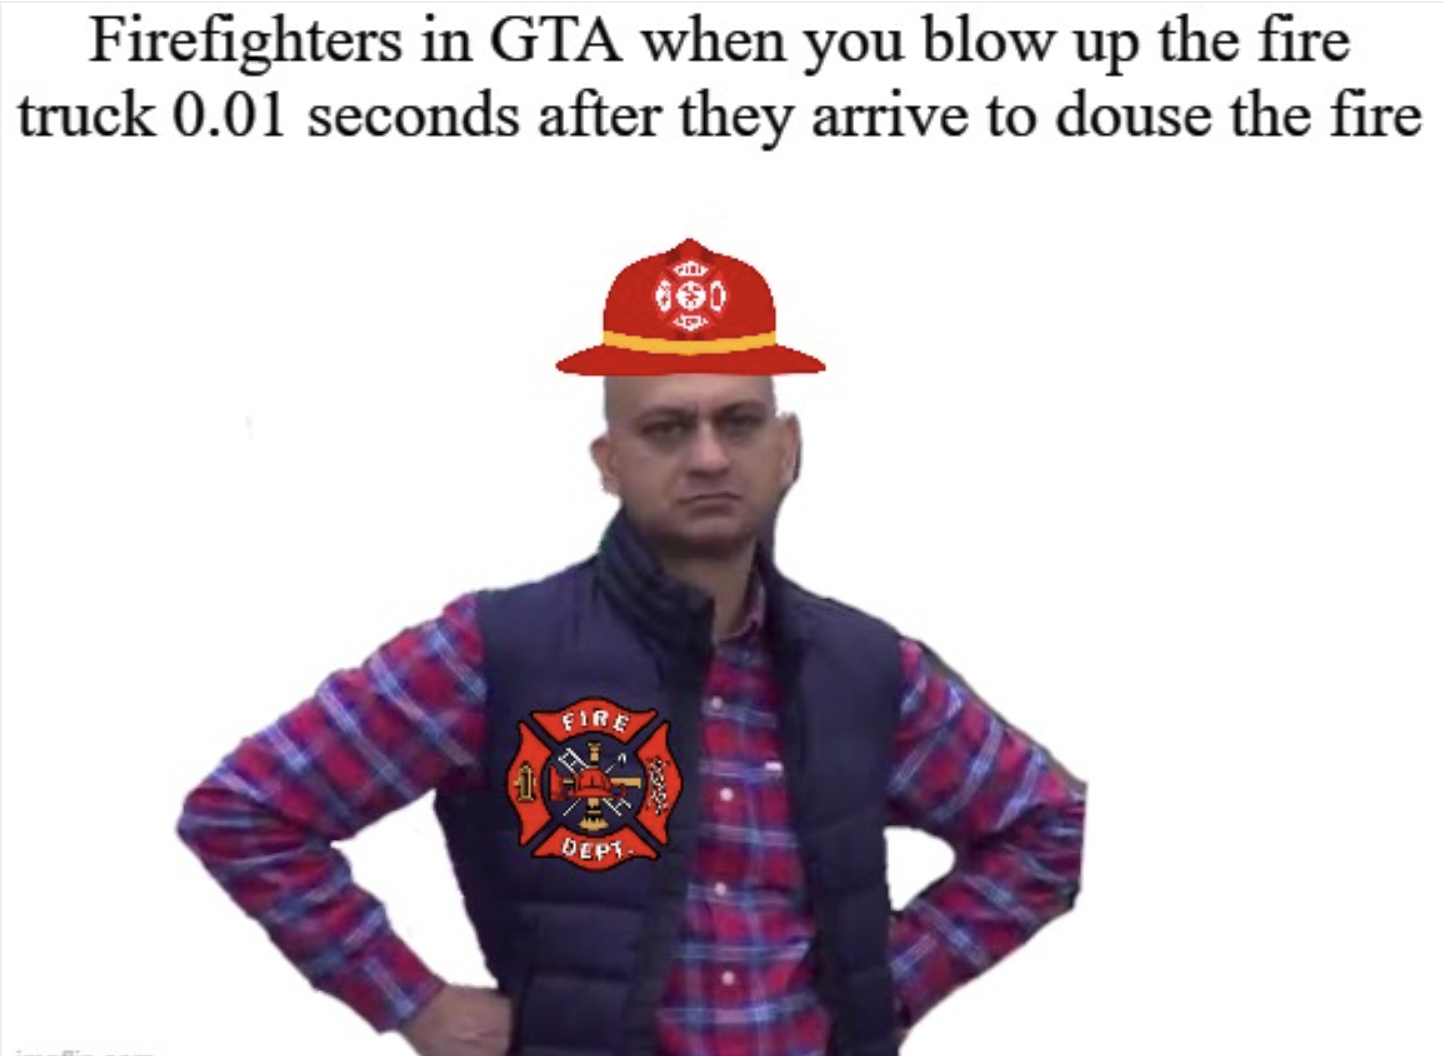 GTA V Memes - meme mad - Firefighters in Gta when you blow up the fire truck 0.01 seconds after they arrive to douse the fire Fire Dept 600